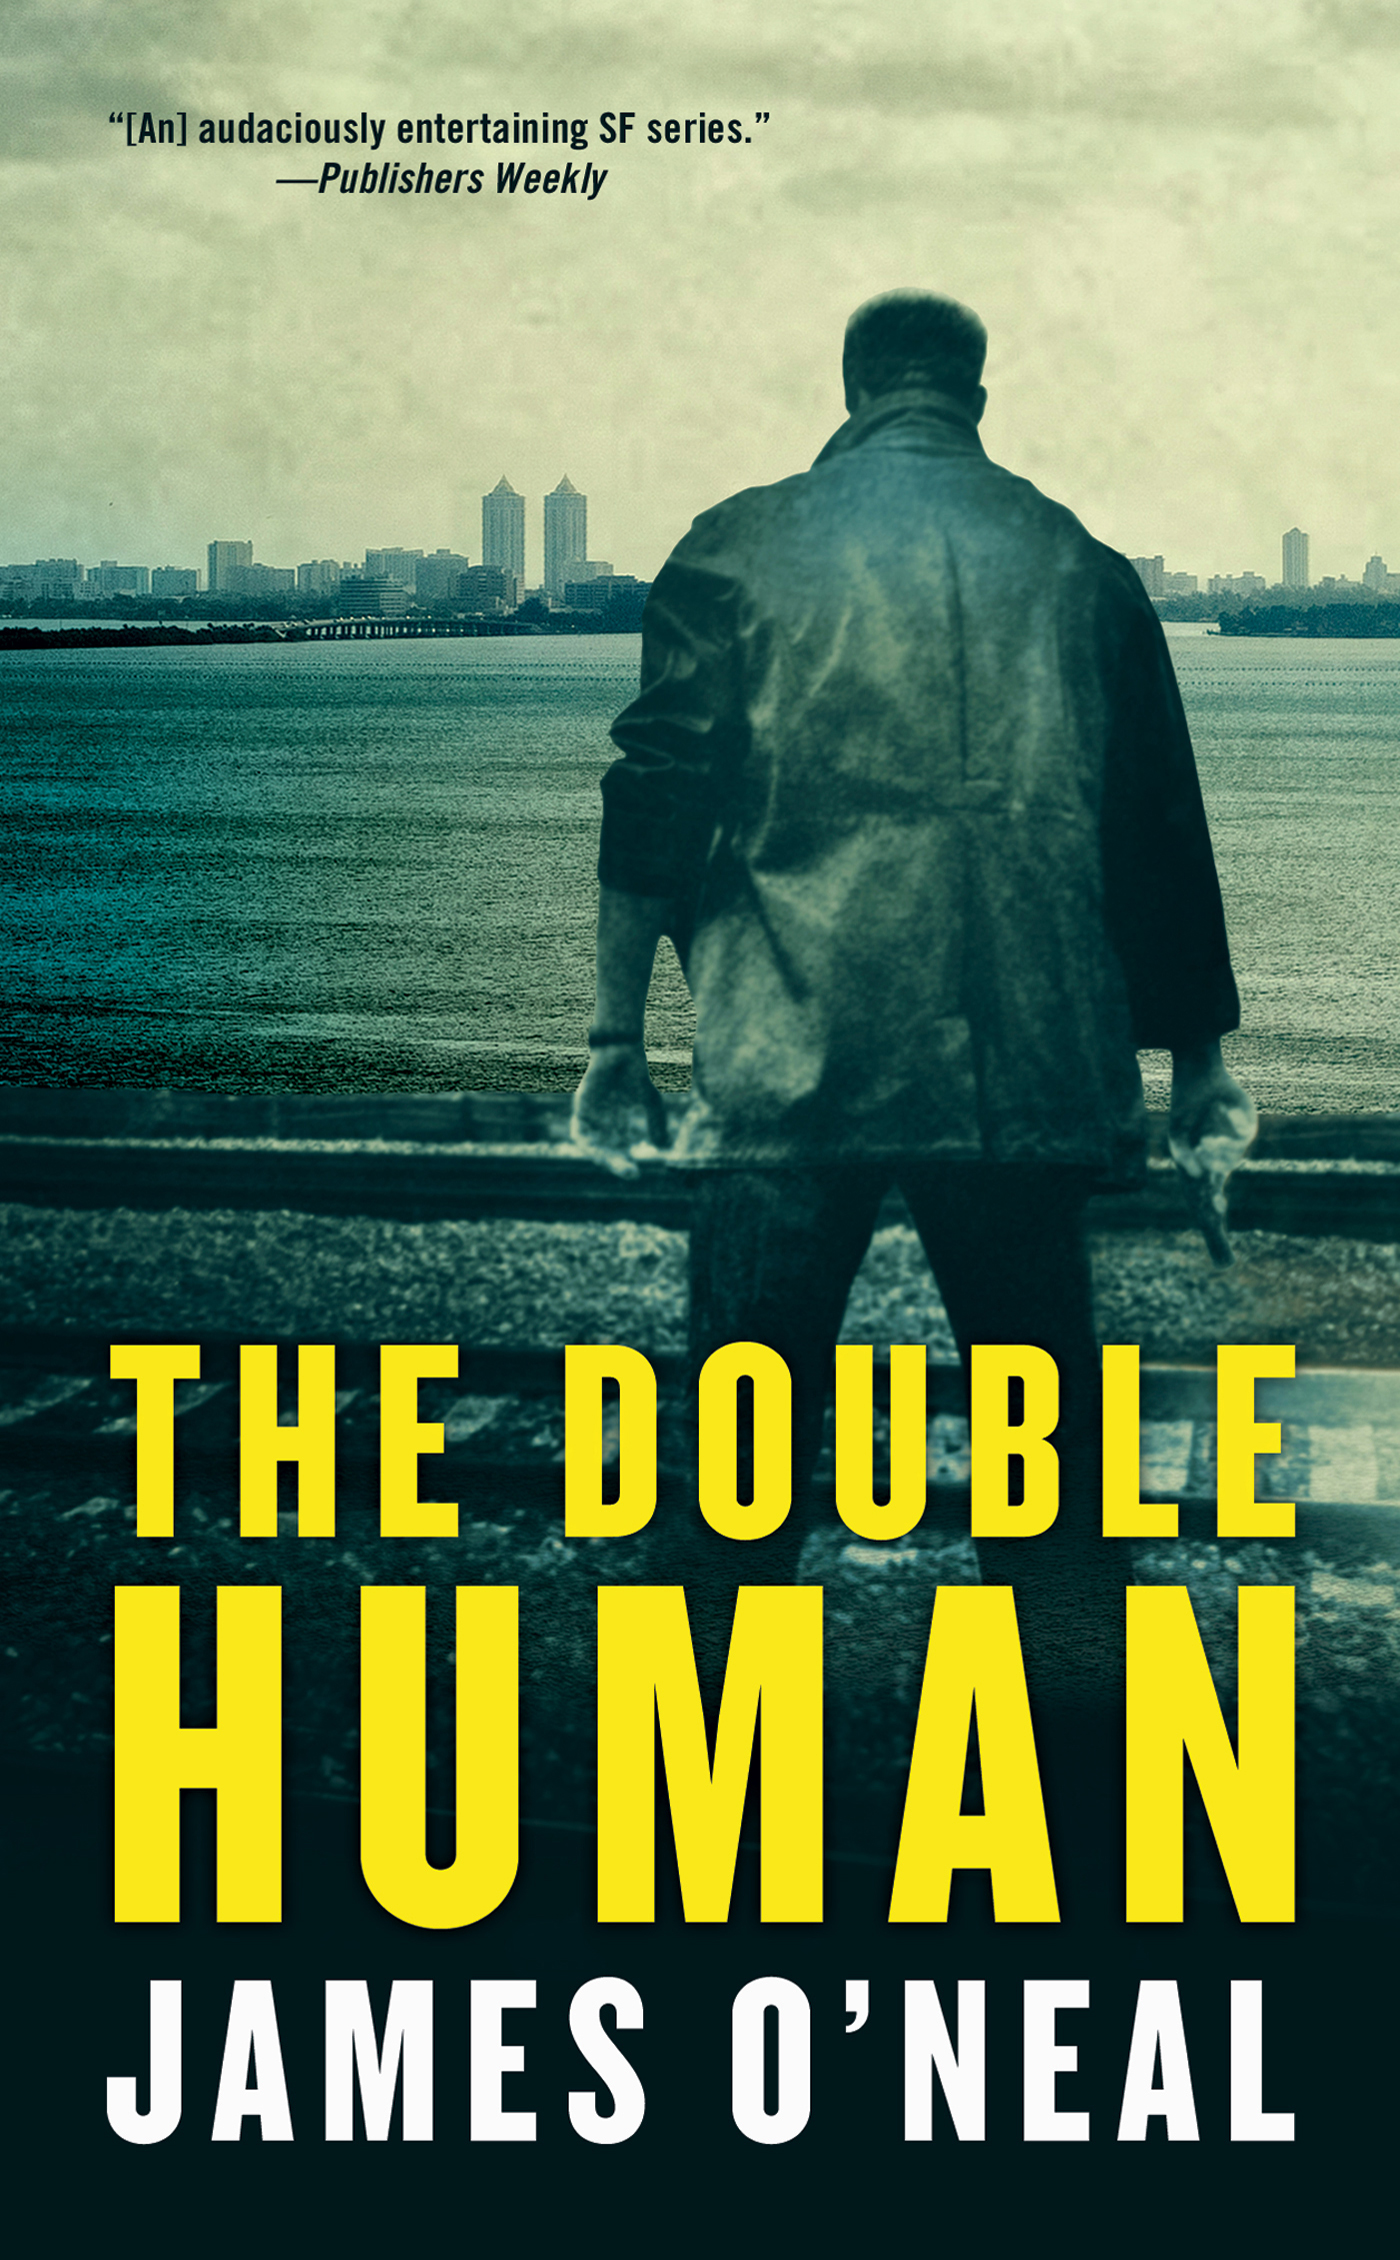 The Double Human by James O'Neal